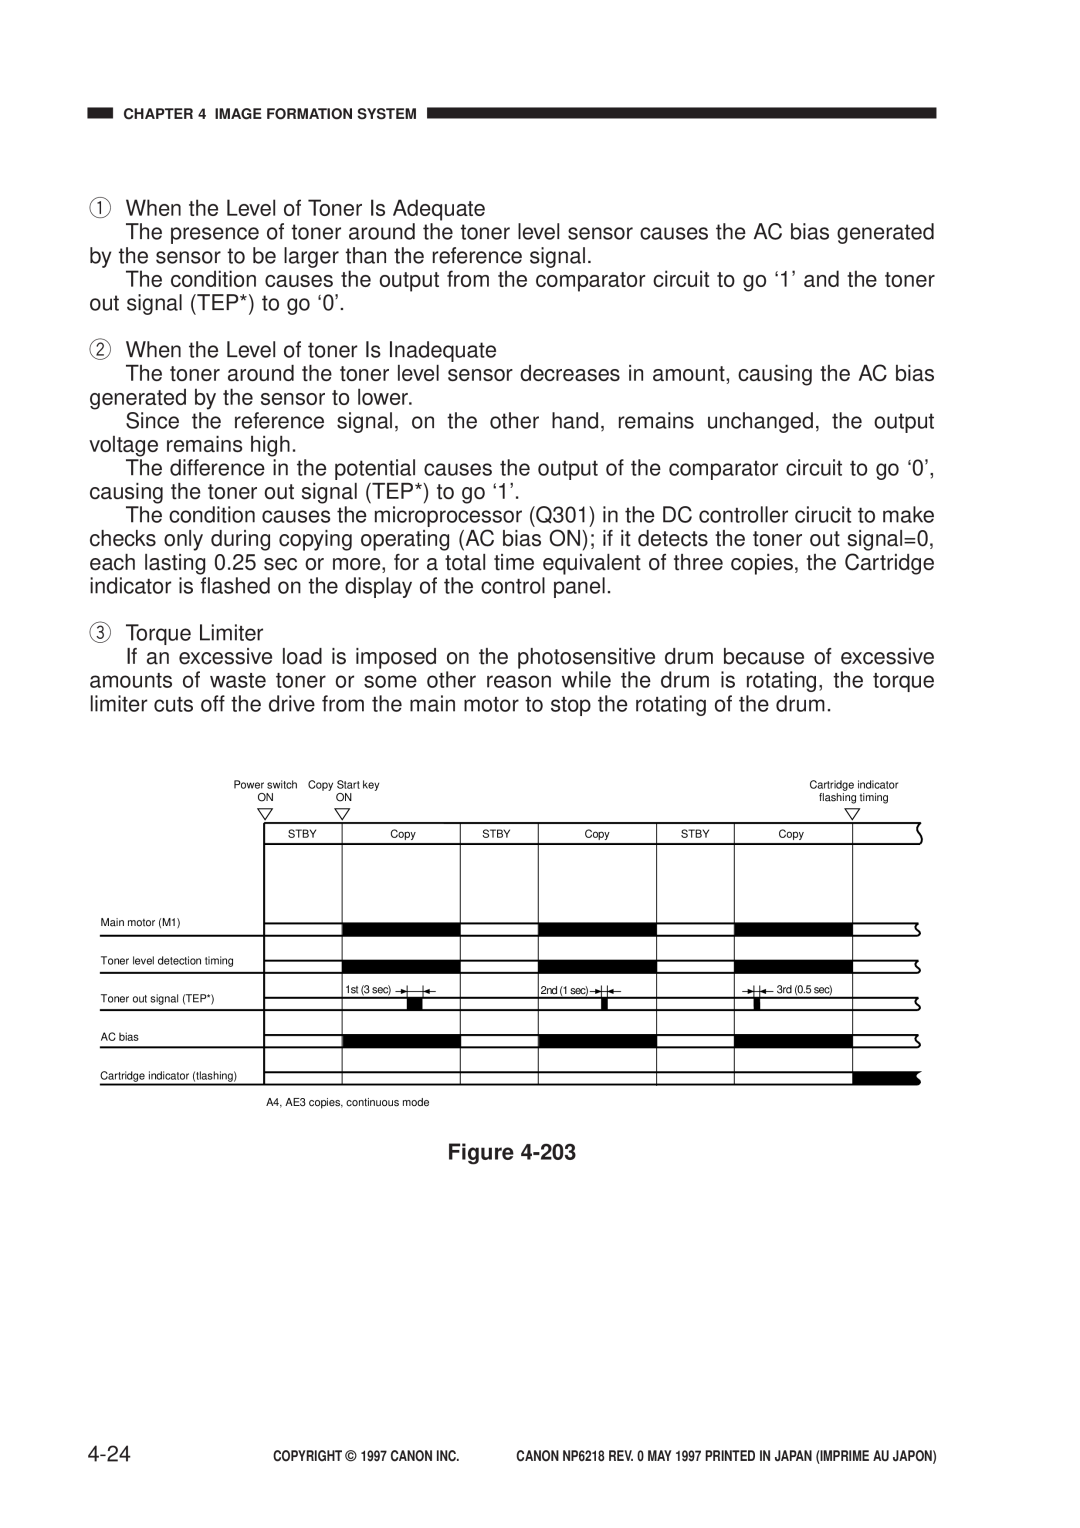 Canon NP6218, FY8-13EX-000 service manual 4-24, q When the Level of Toner Is Adequate 